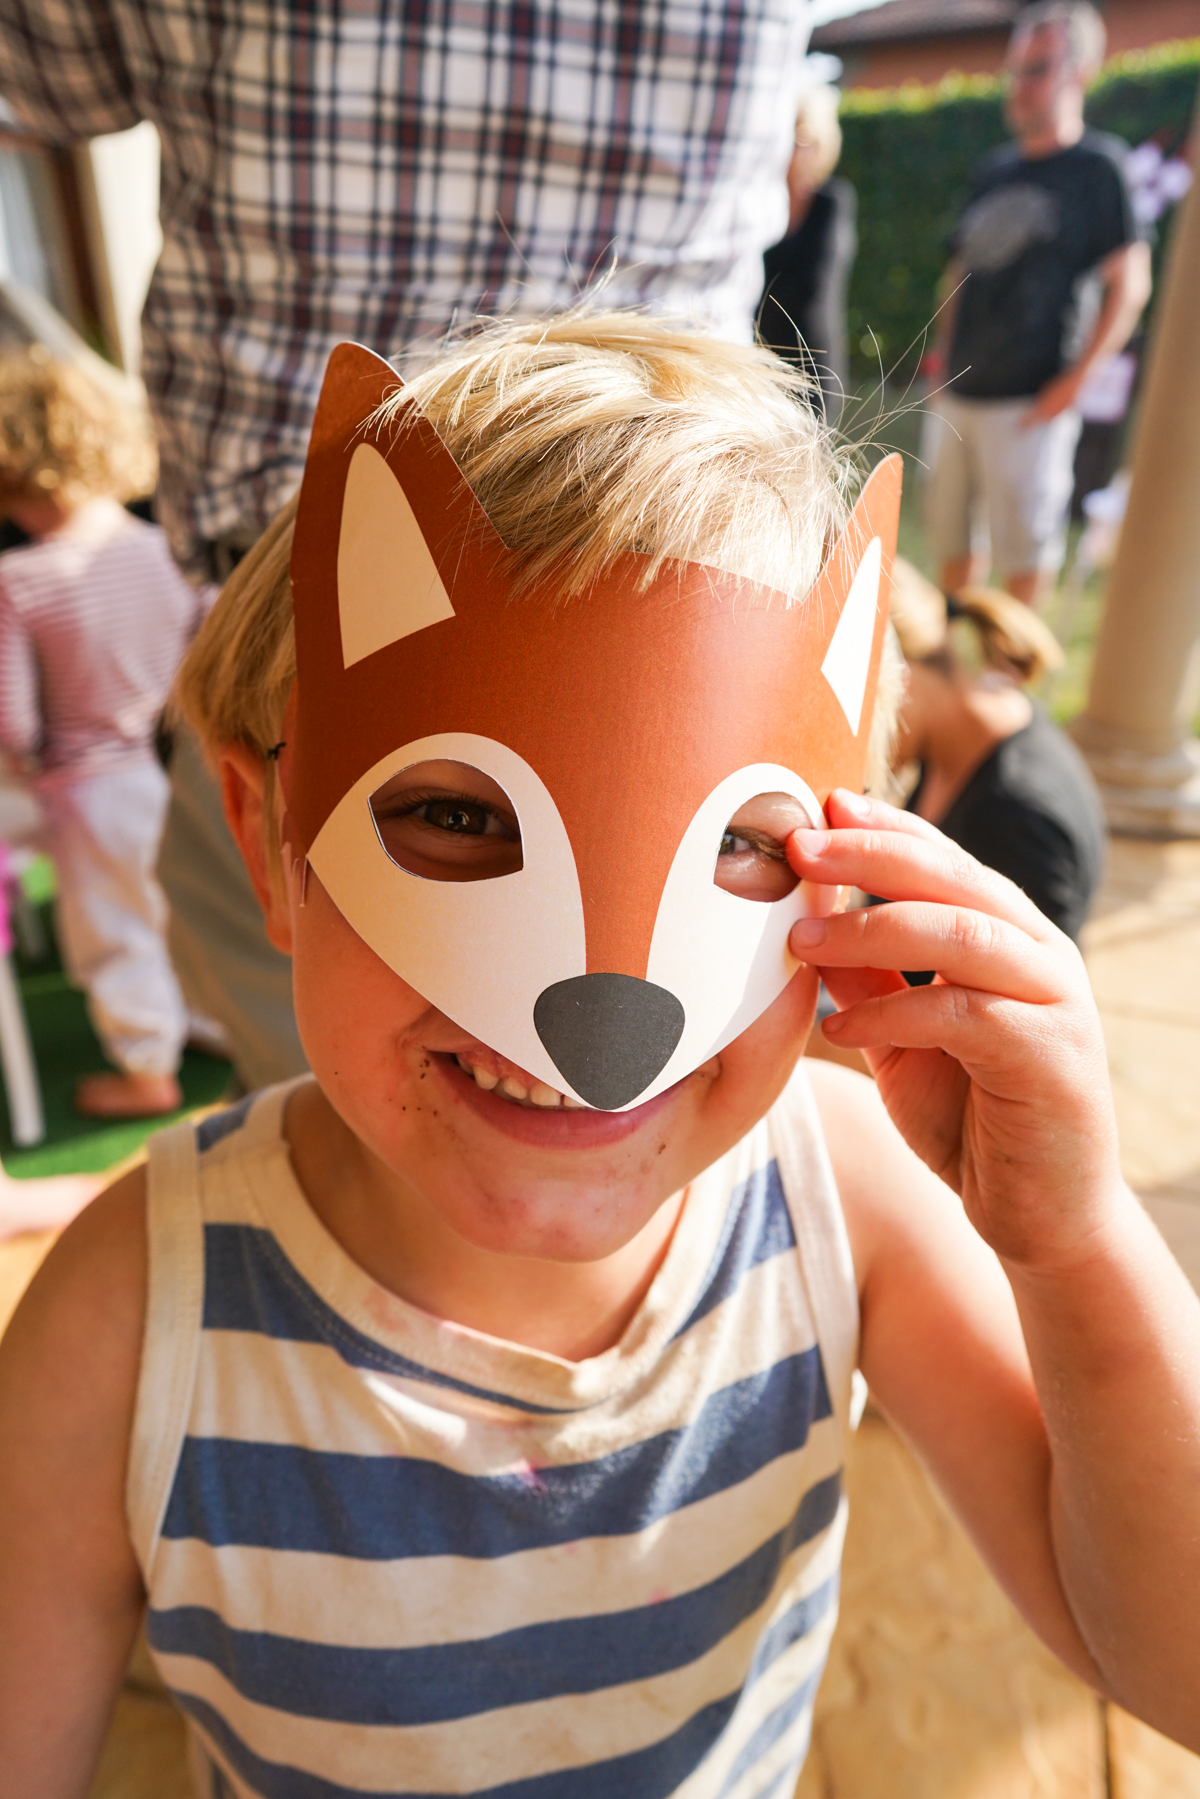 Little Red Riding Hood Birthday Party Game of the Big Bad Wolf by printing Wolf Masks and attaching elastic to fit